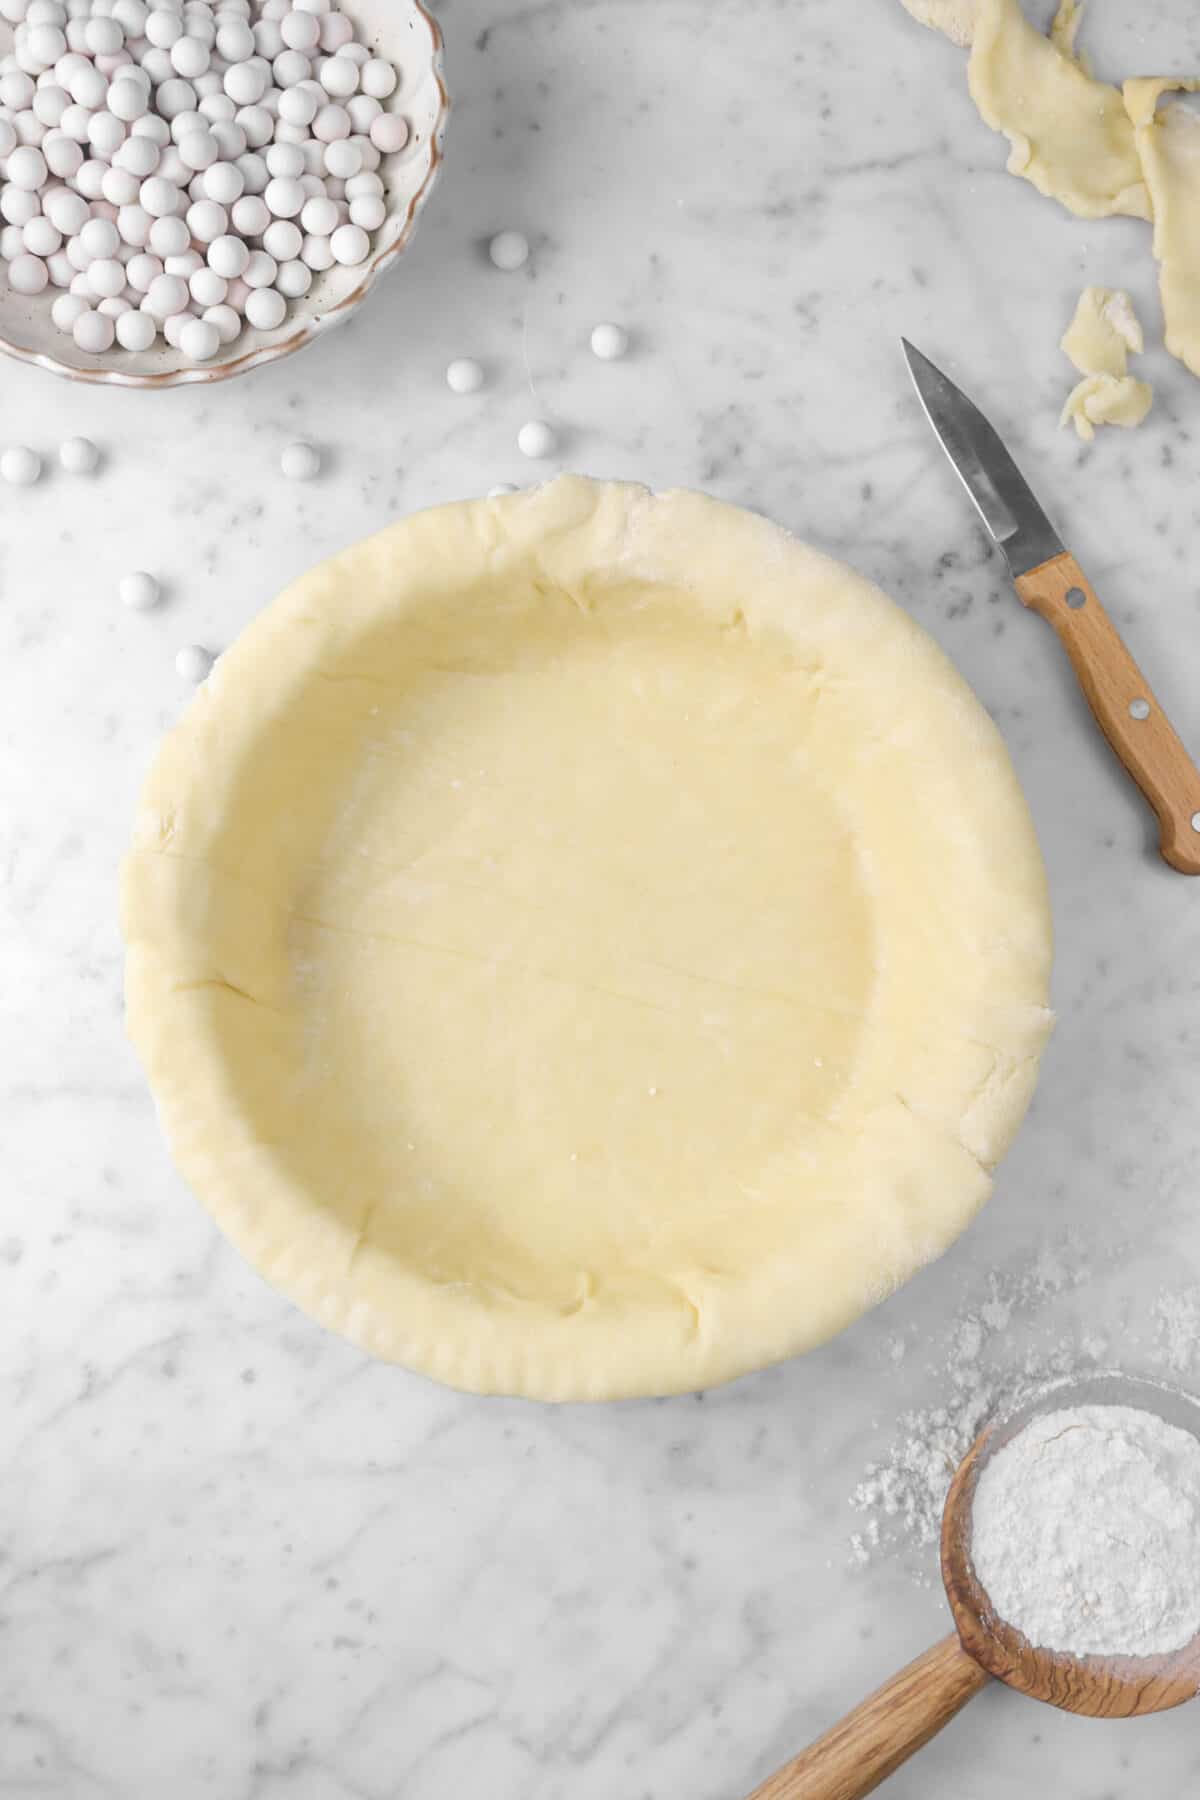 pie dough with pie weights, knife, and flour